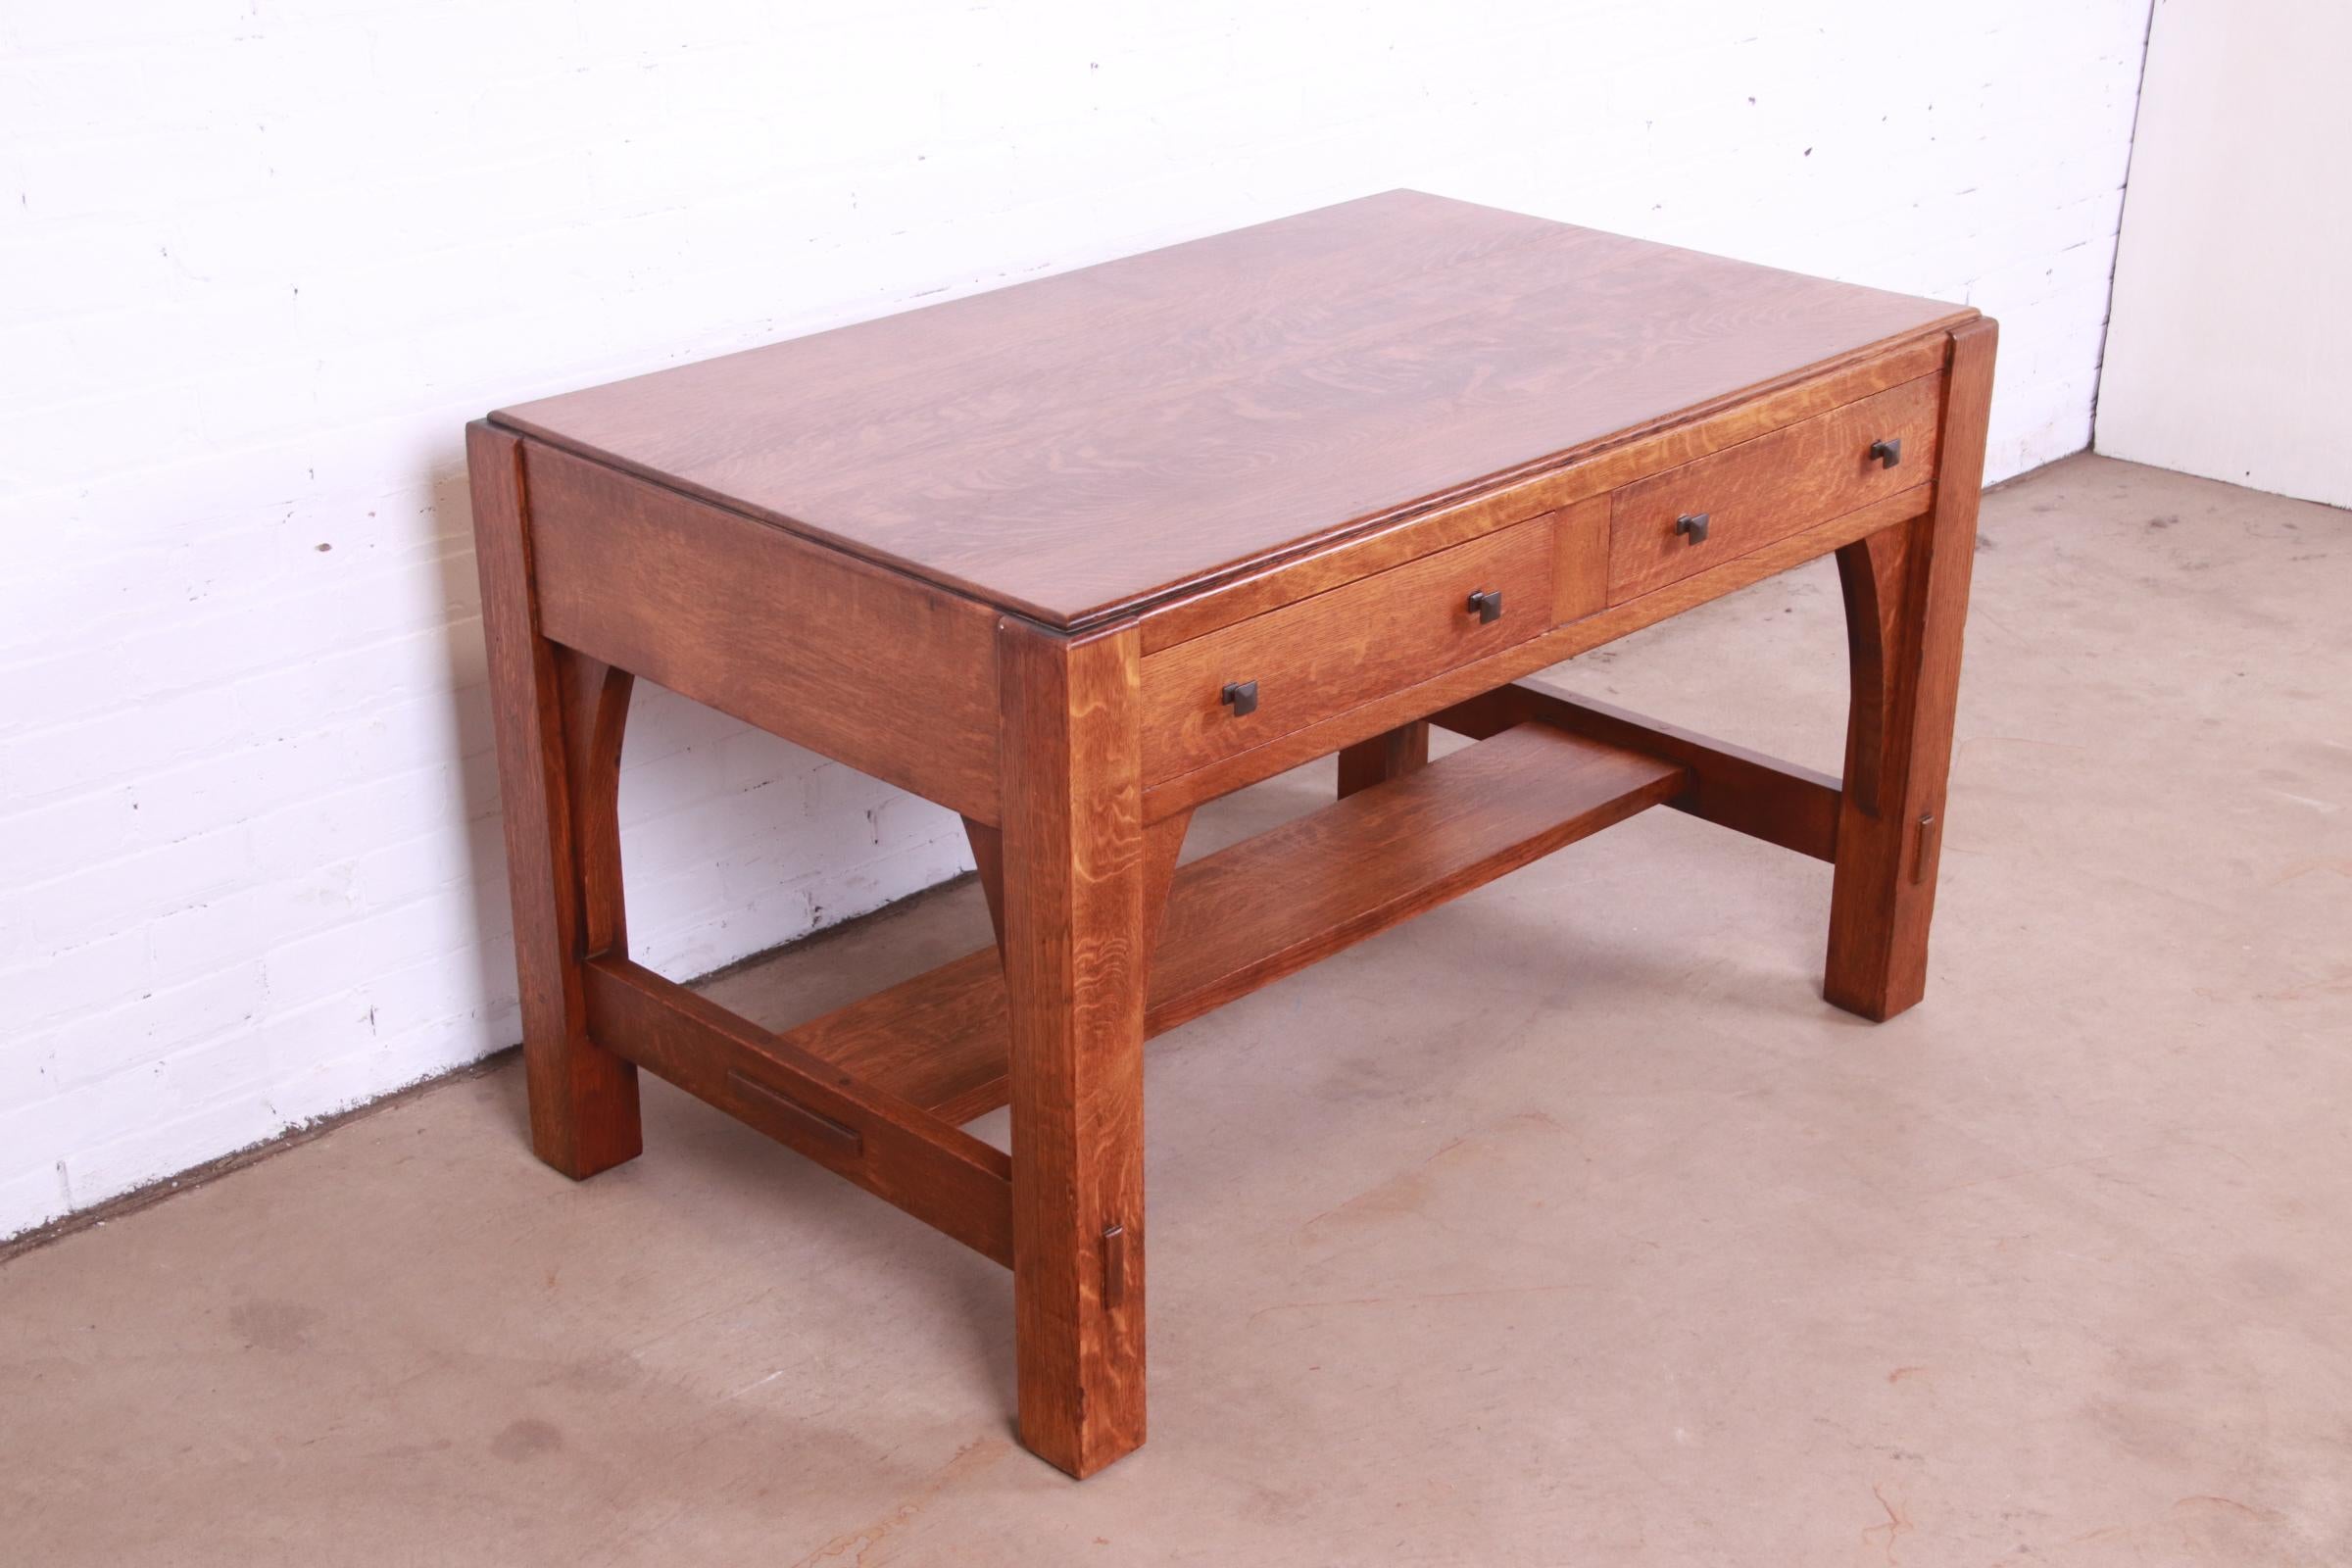 American Limbert Mission Oak Arts & Crafts Desk or Library Table, Circa 1900